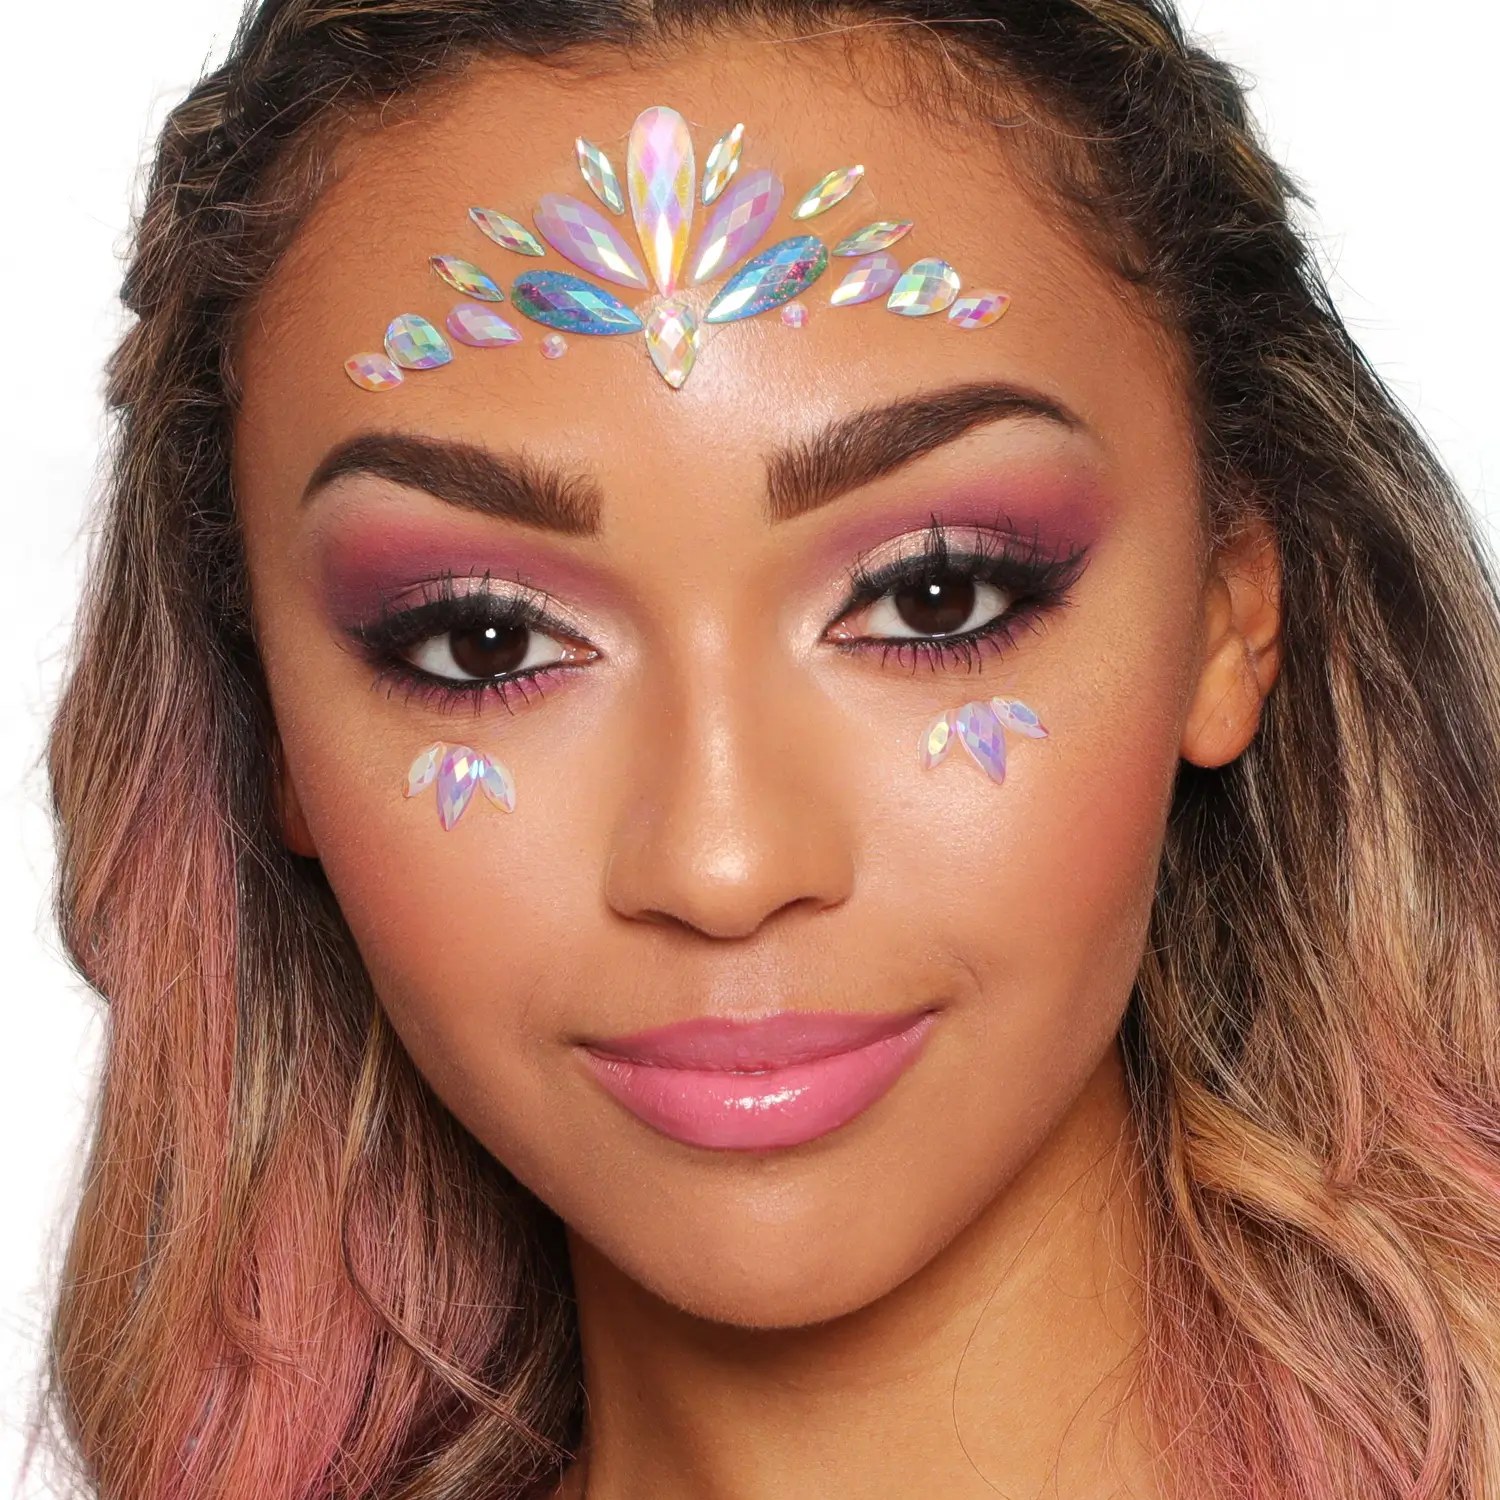 Unicorn Dreams Face Jewels on Model by Glitter Me Up ™ | PaintGlow